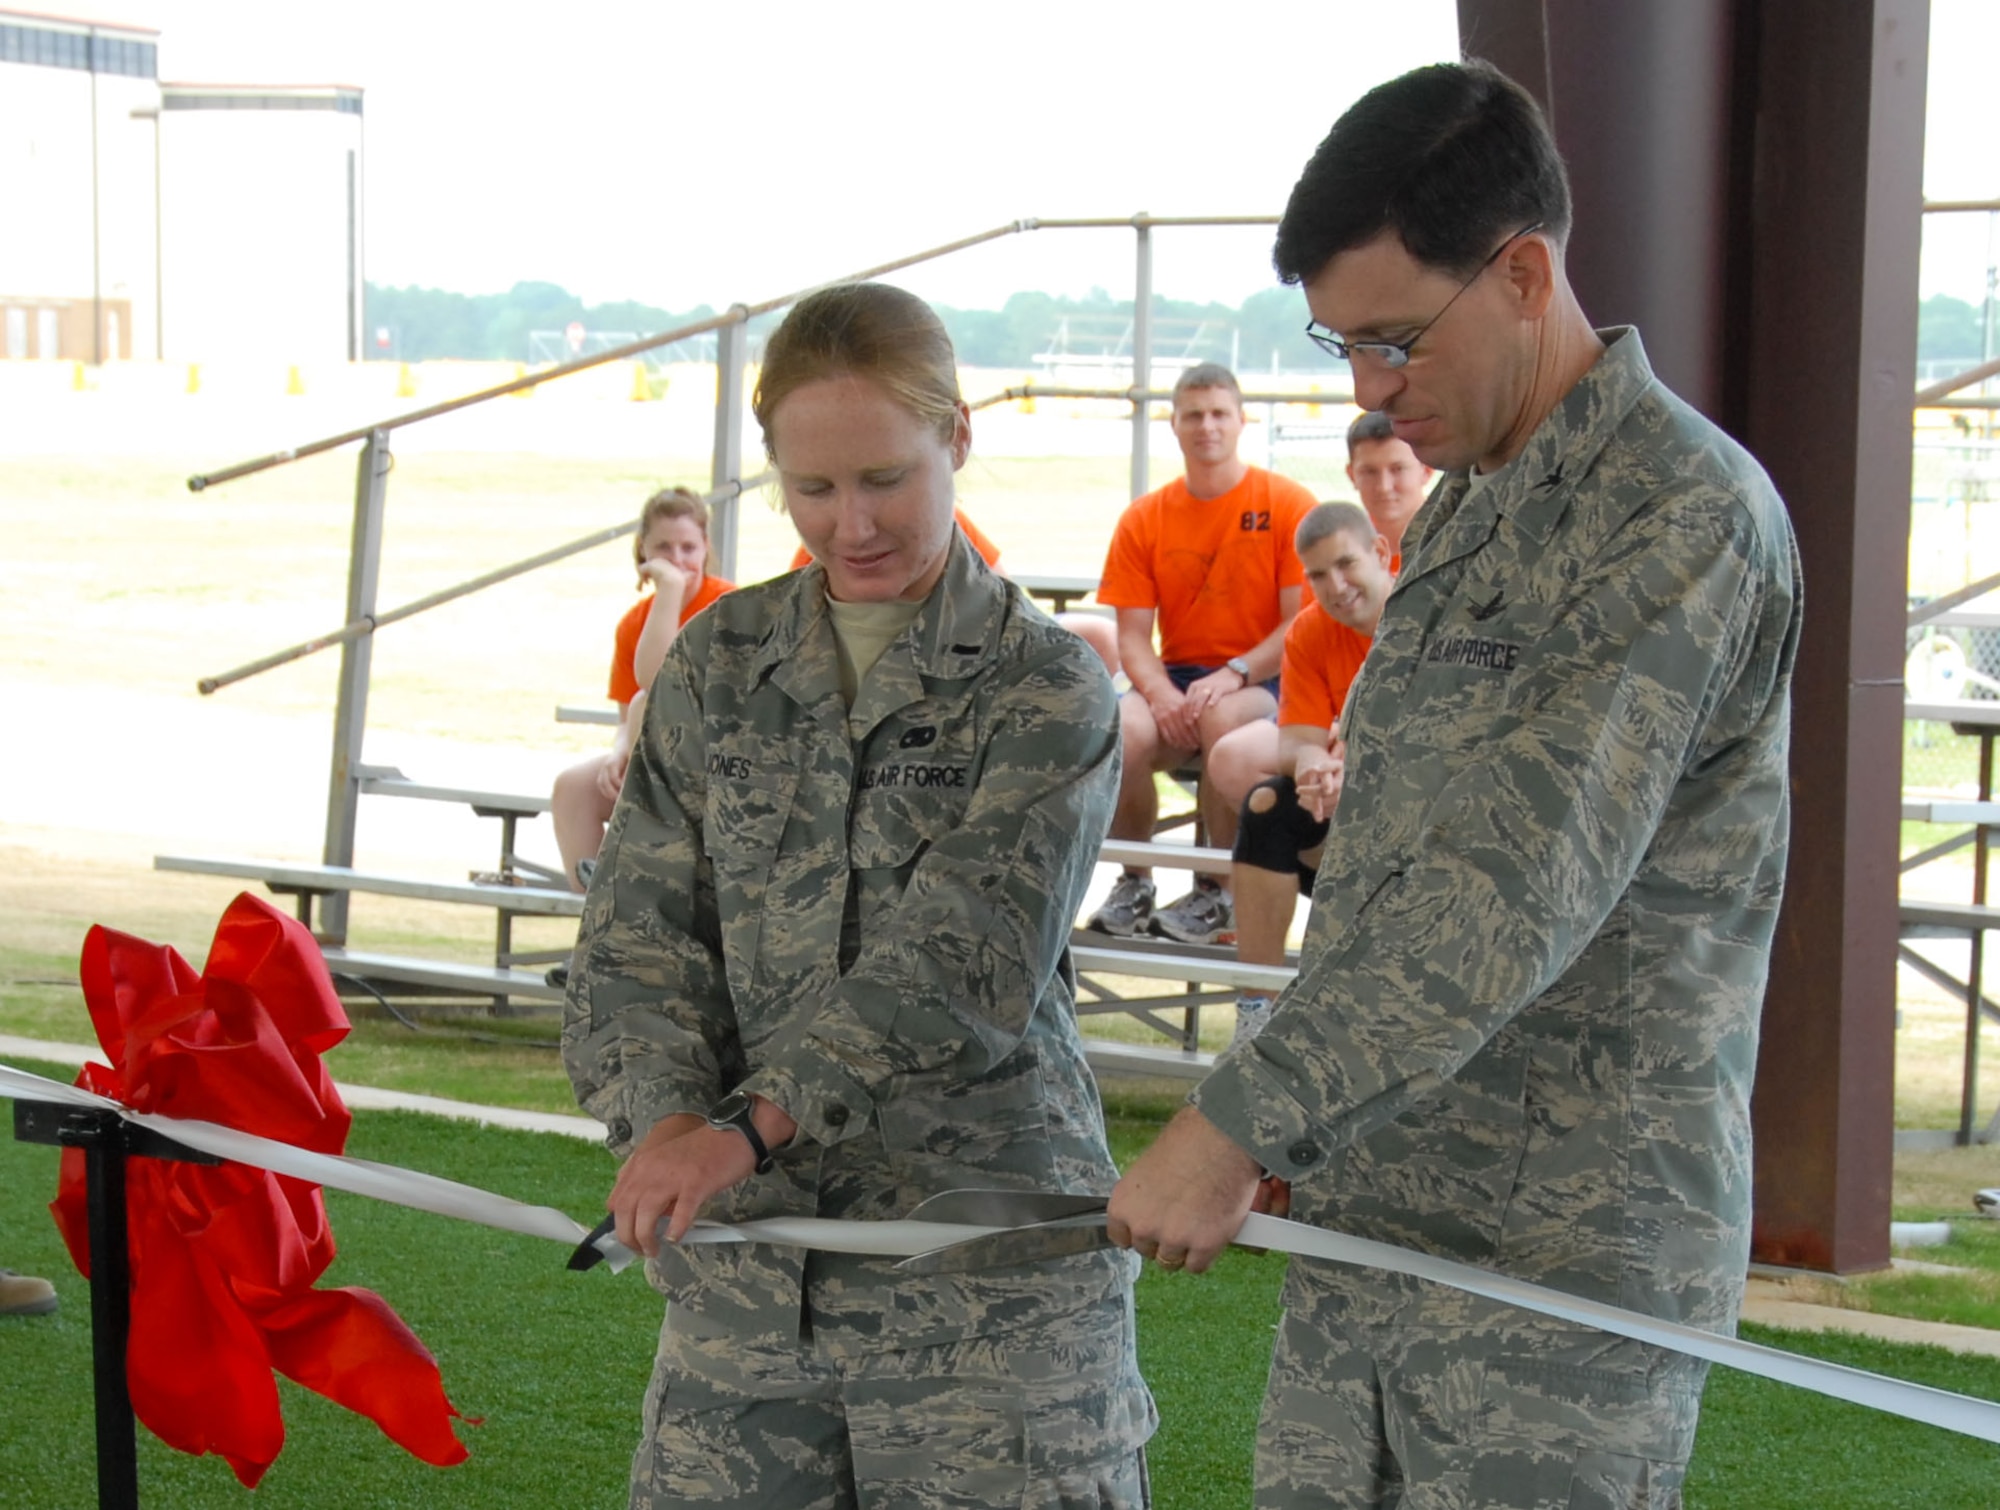 Col. Stephen Tanous, Squadron Officer College commandant, and 1st Lt. Kristen Jones, the youngest course instructor at the Air and Space Basic Course, cut the ribbon at the opening of ASBCs new Expeditionary Training Complex May 1. Afterwards, an Air Force combatives performance was conducted by ASBC instructors and students. (U.S. Air Force photo by Jamie Pitcher)